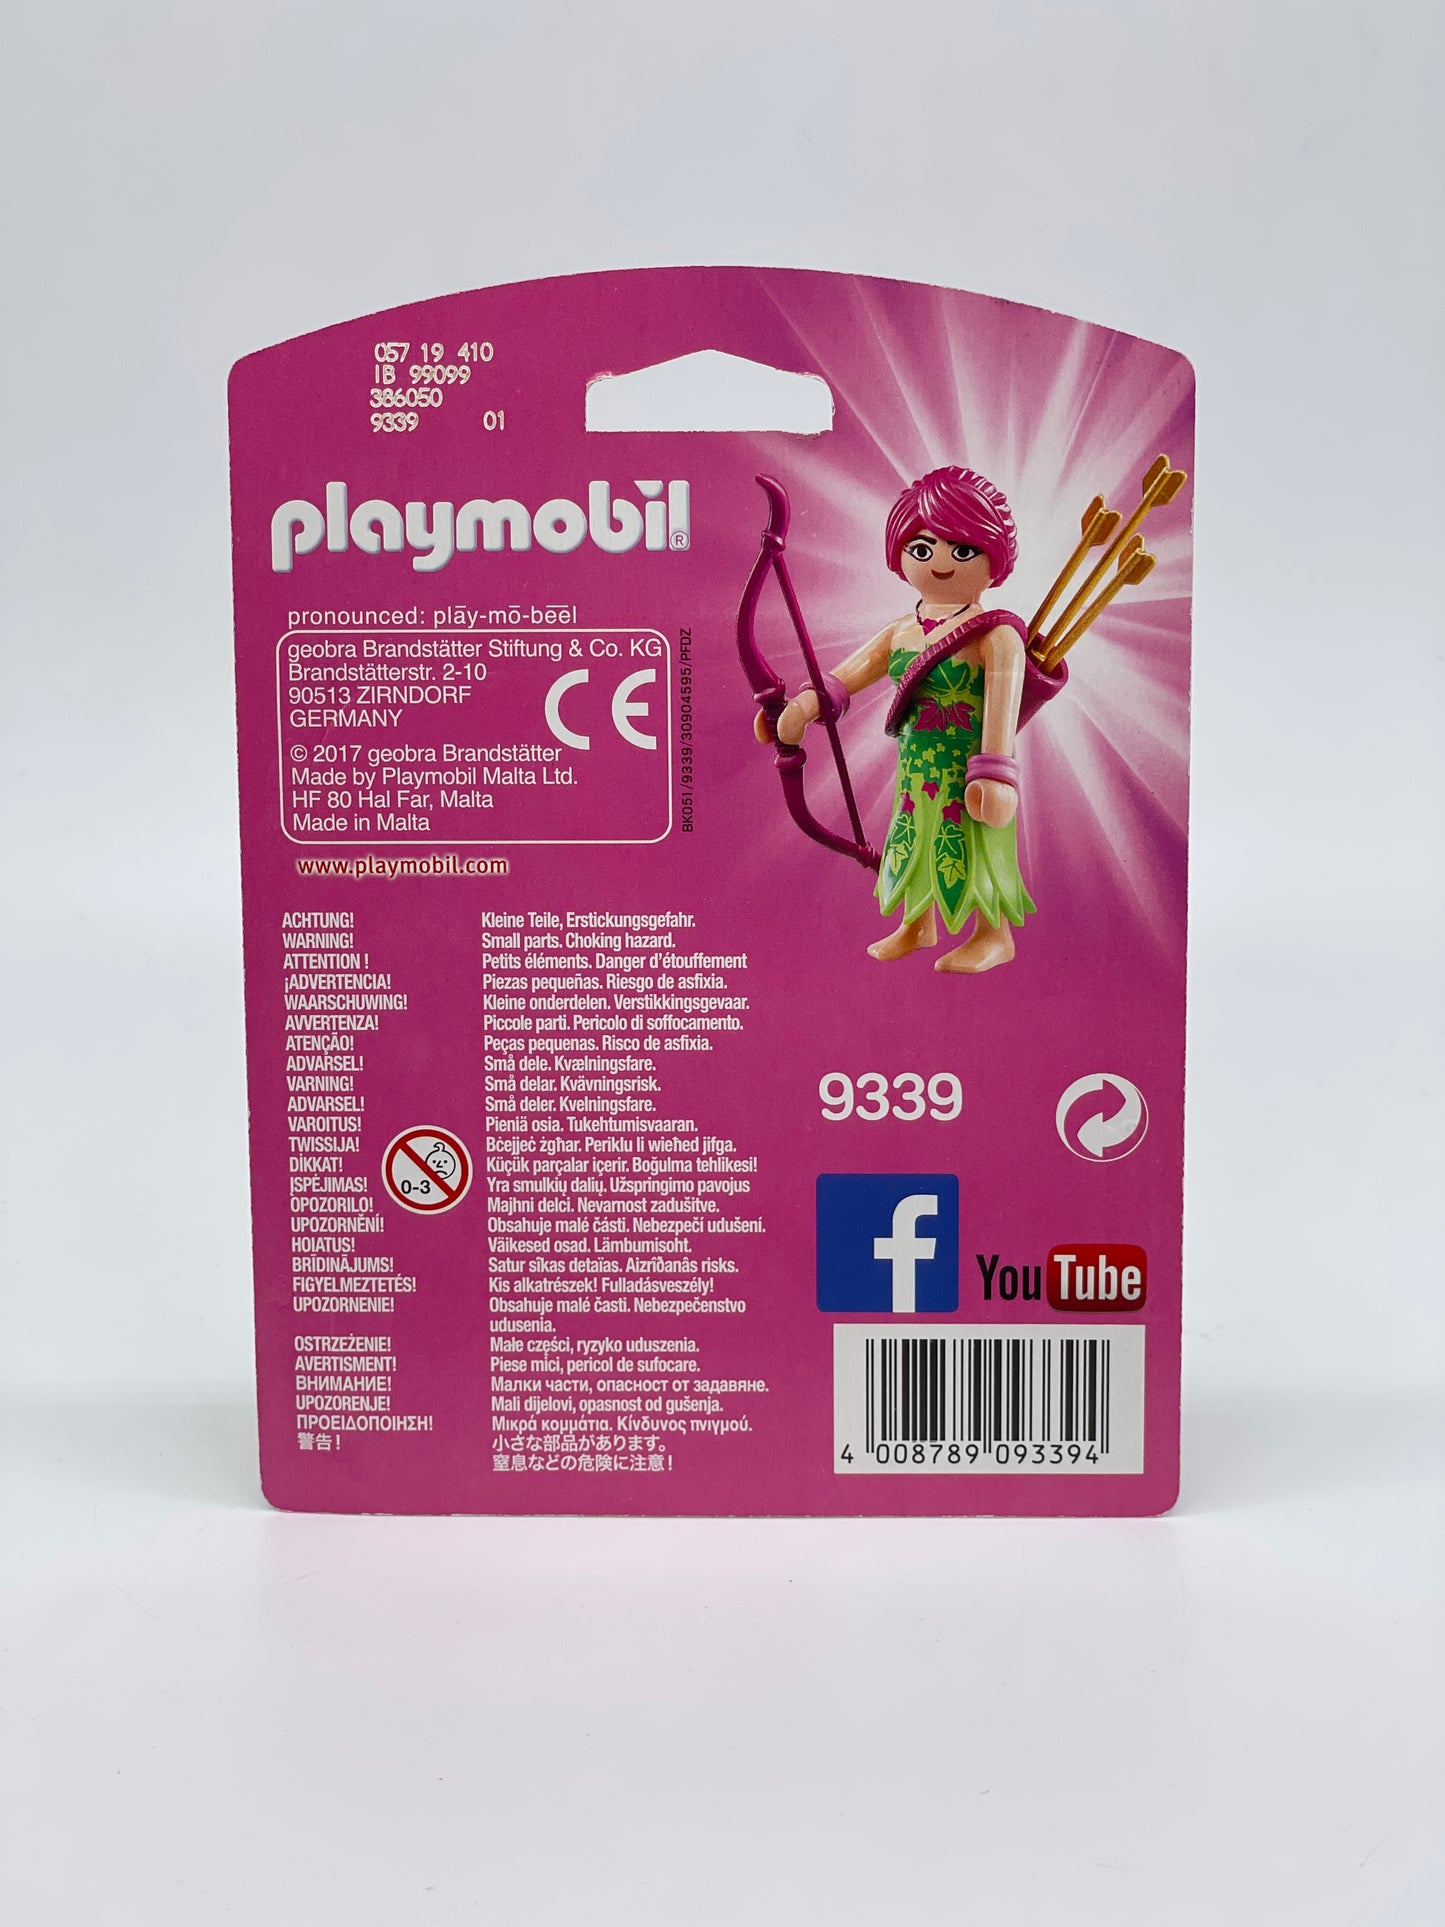 Playmobil Playmo Friends - Wood Elf with Bow and Arrow - 9339 (2017) 